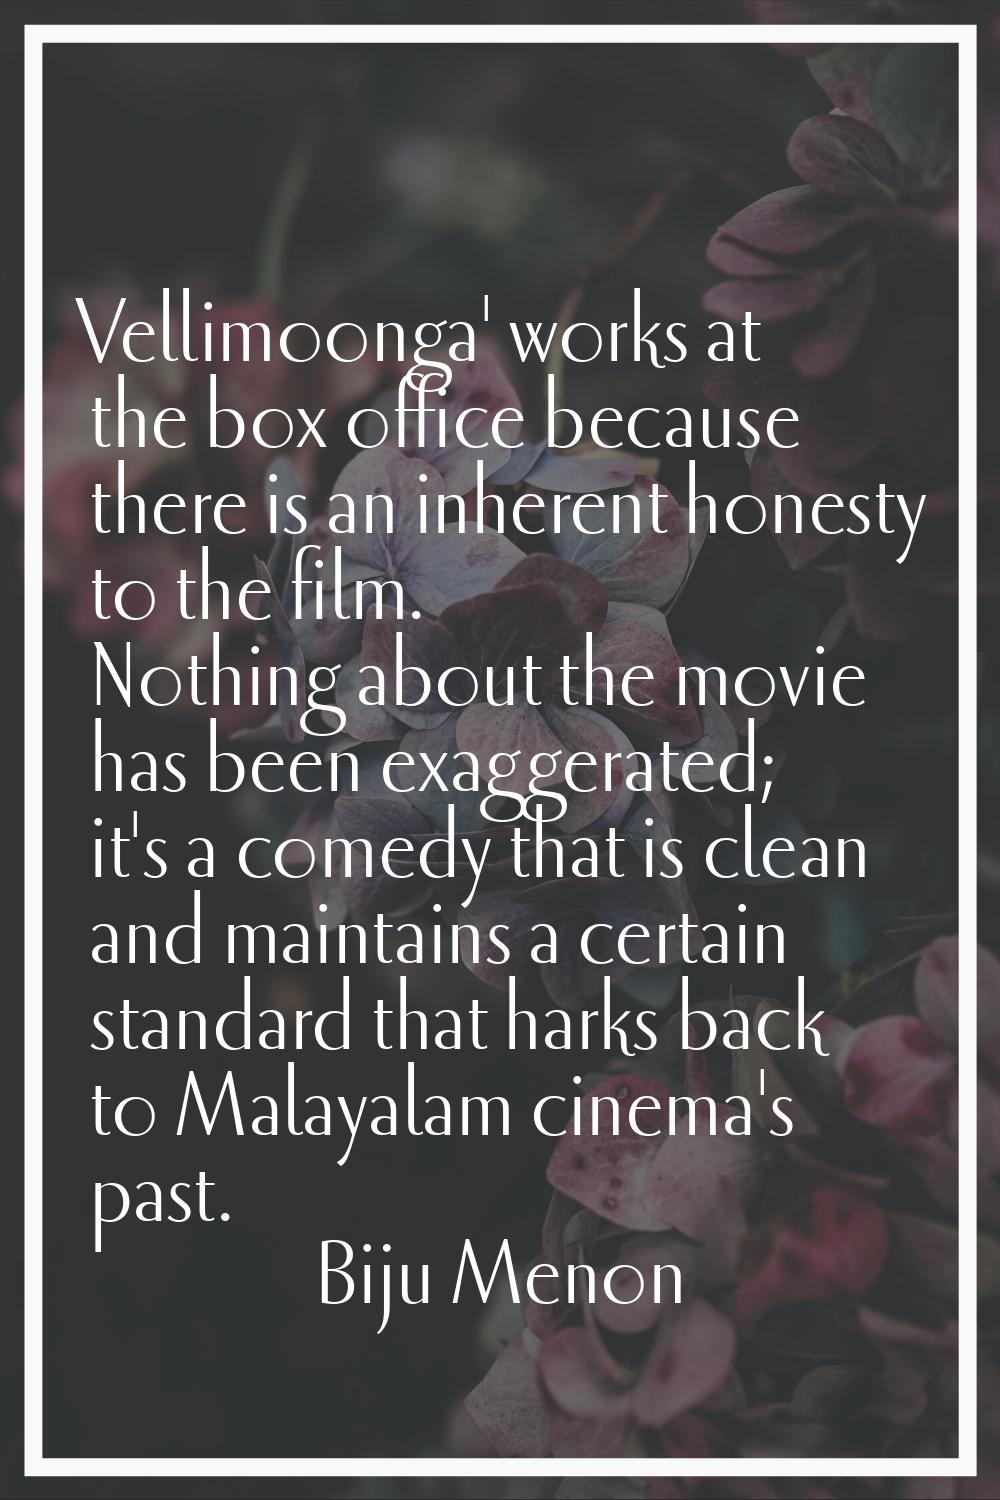 Vellimoonga' works at the box office because there is an inherent honesty to the film. Nothing abou